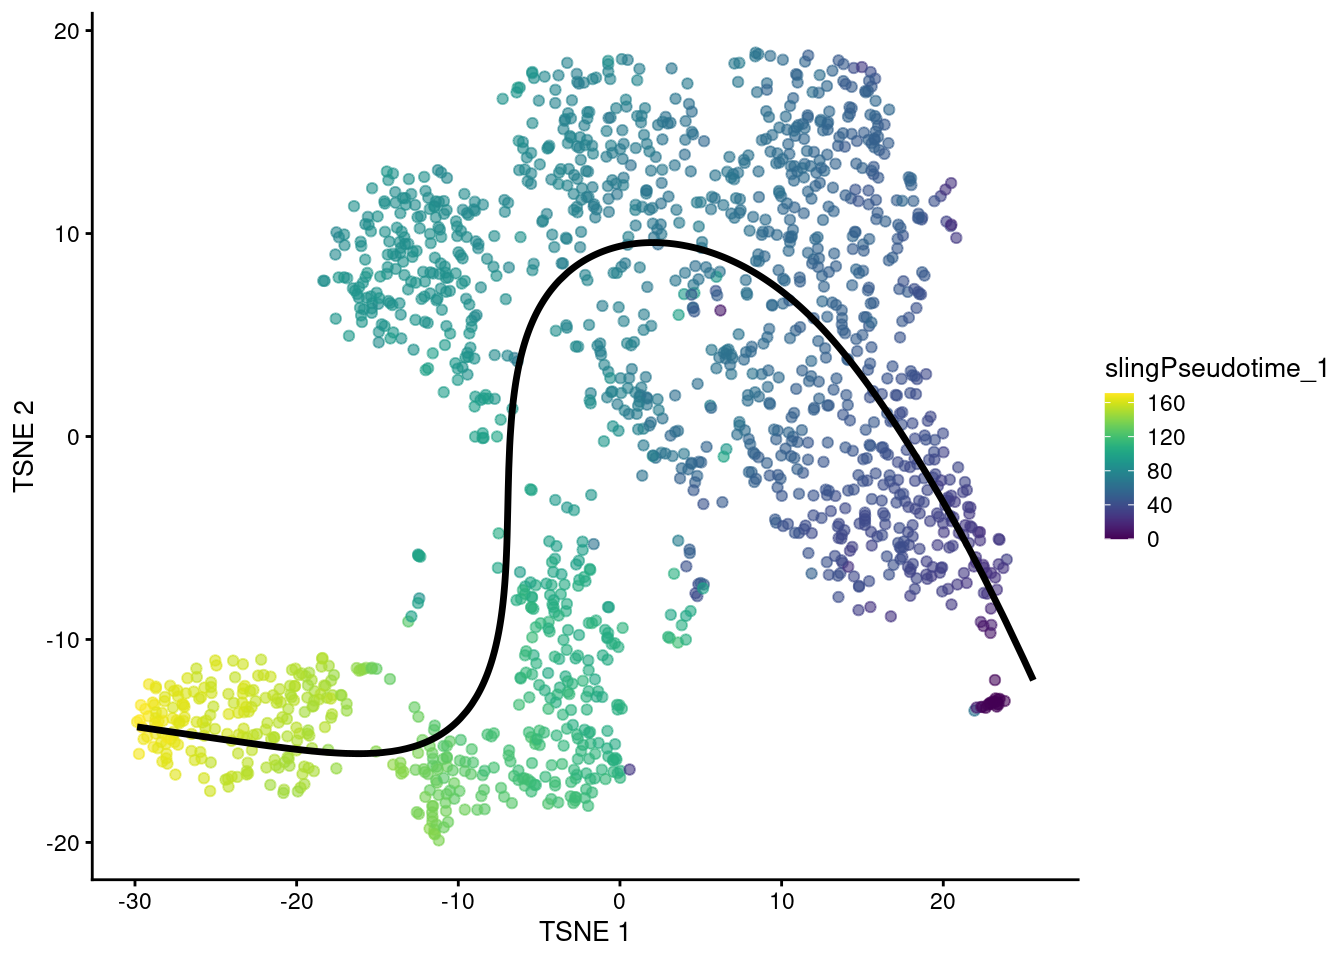 $t$-SNE plot of the Nestorowa HSC dataset where each point is a cell and is colored by the _slingshot_ pseudotime ordering. The fitted principal curve is shown in black.